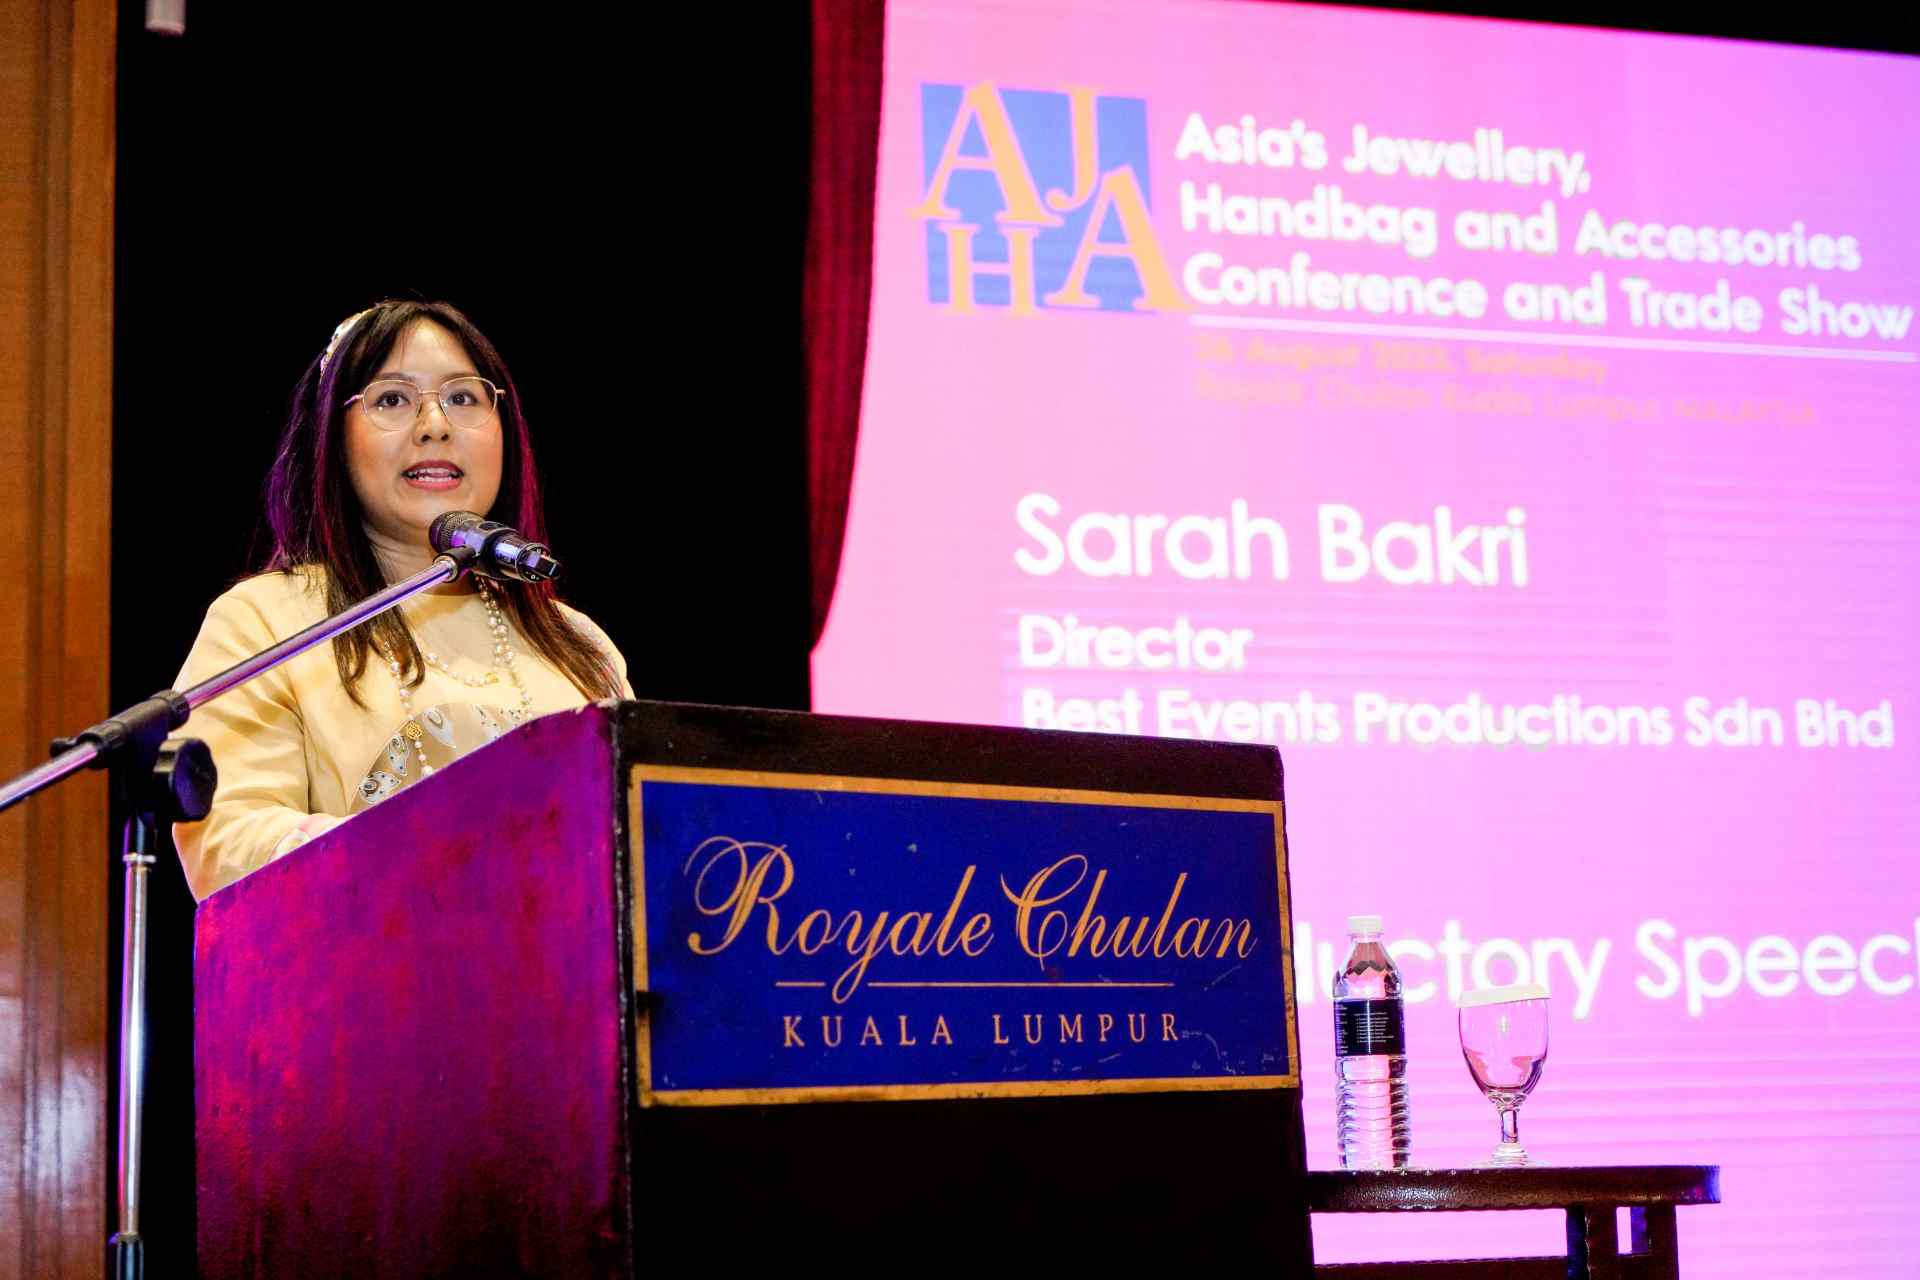 Sarah Bakri, Director of Best Events Productions's welcome speech